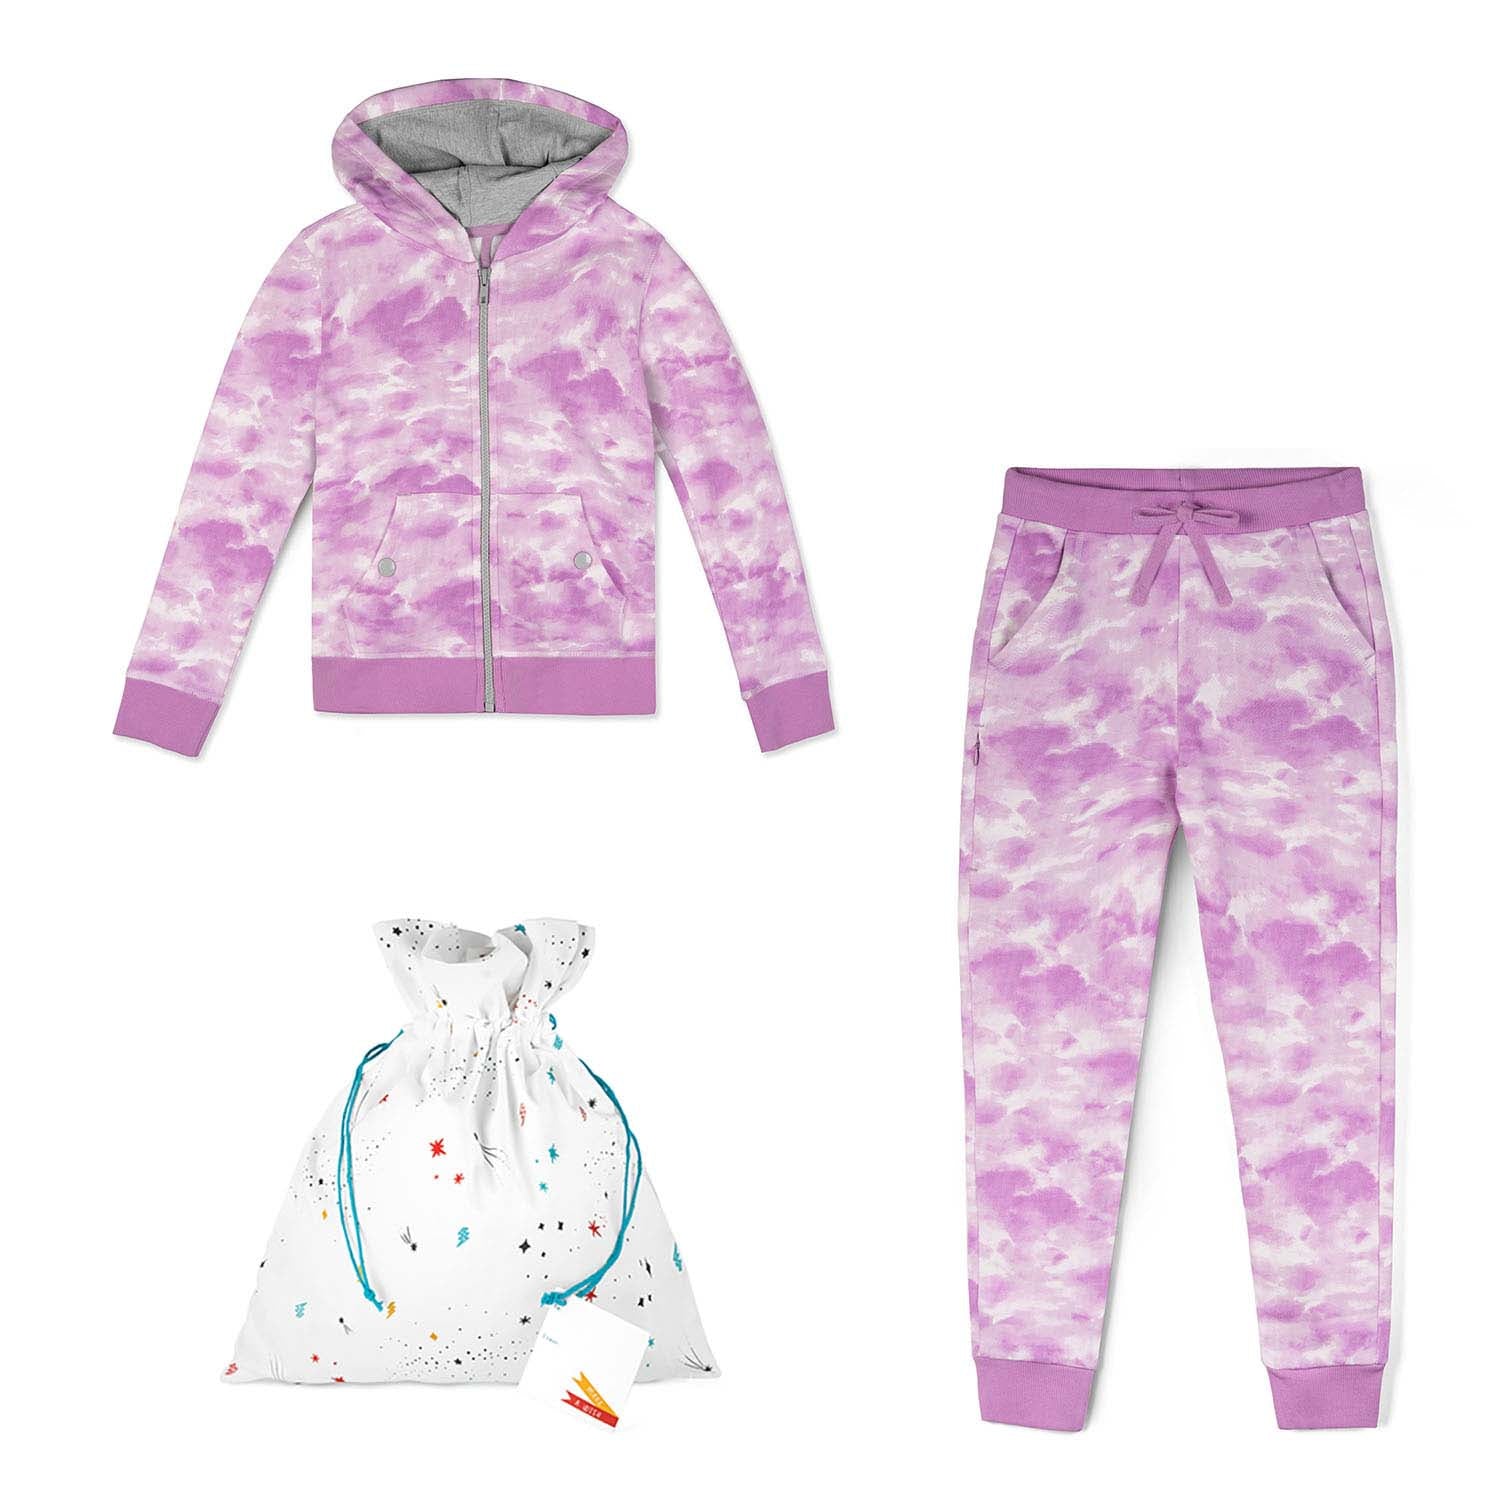 Gift Set: Toddler Cozy Cloud Zip Up Hoodie + Jogger with a Reusable Fabric Gift Bag